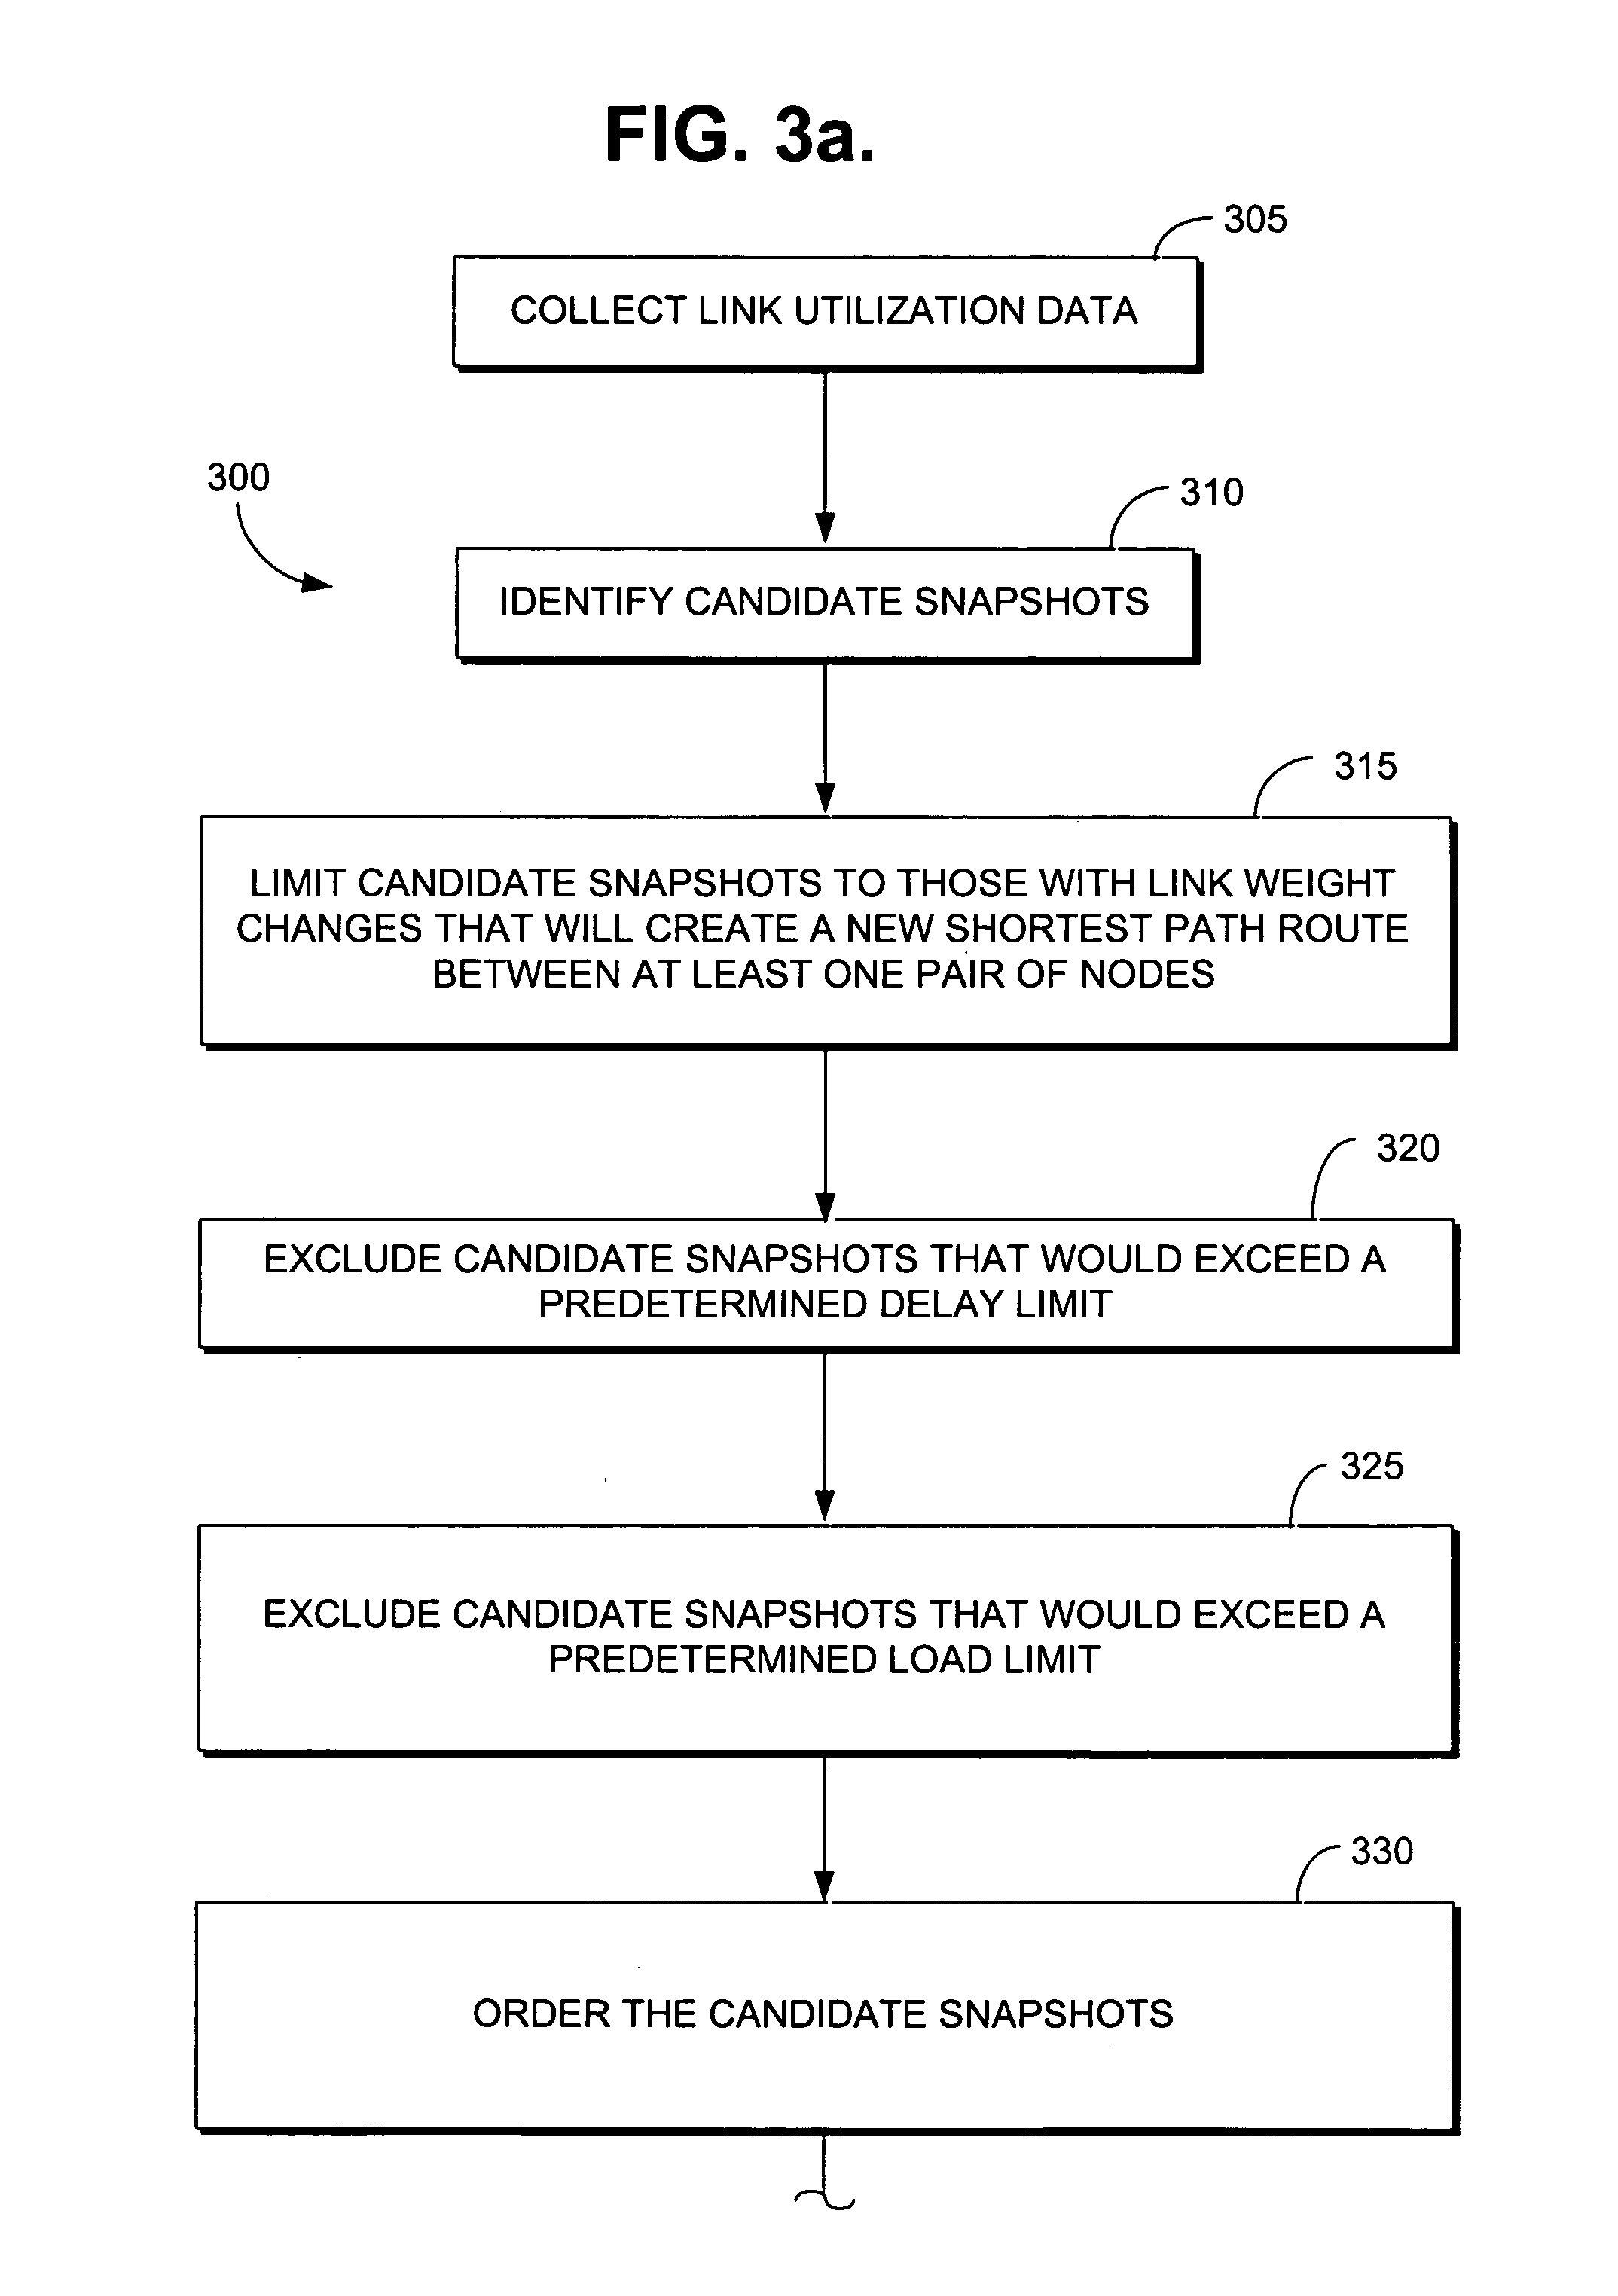 Method for estimating telecommunication network traffic using link weight changes